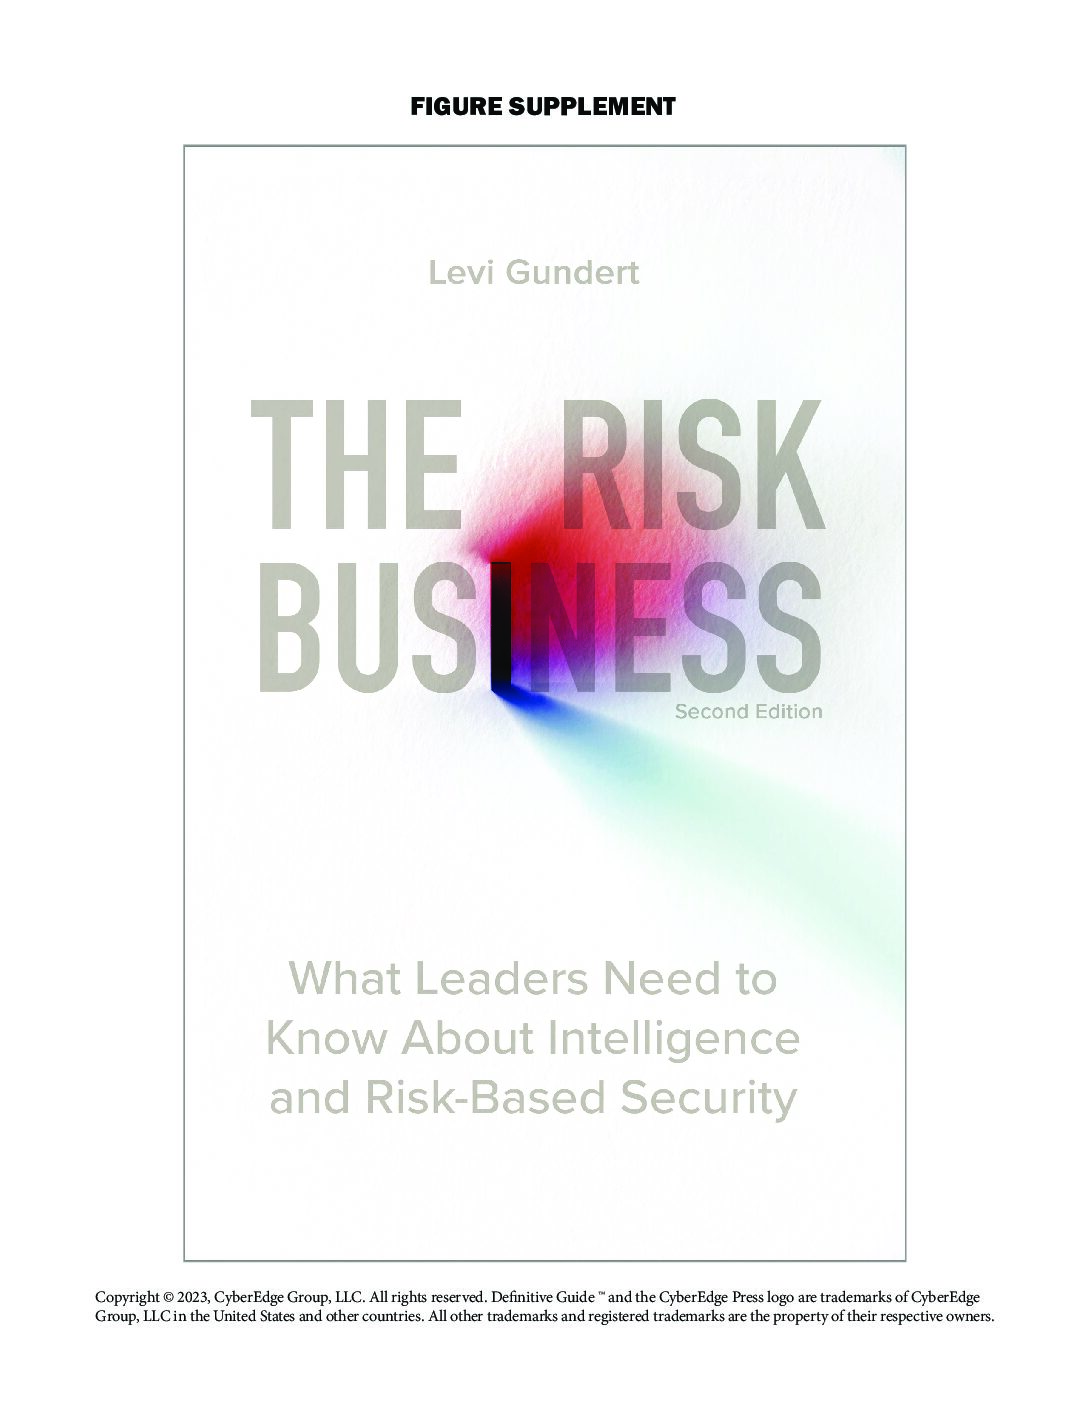 Featured image for Audiobook Figures Supplement: The Risk Business, Second Edition